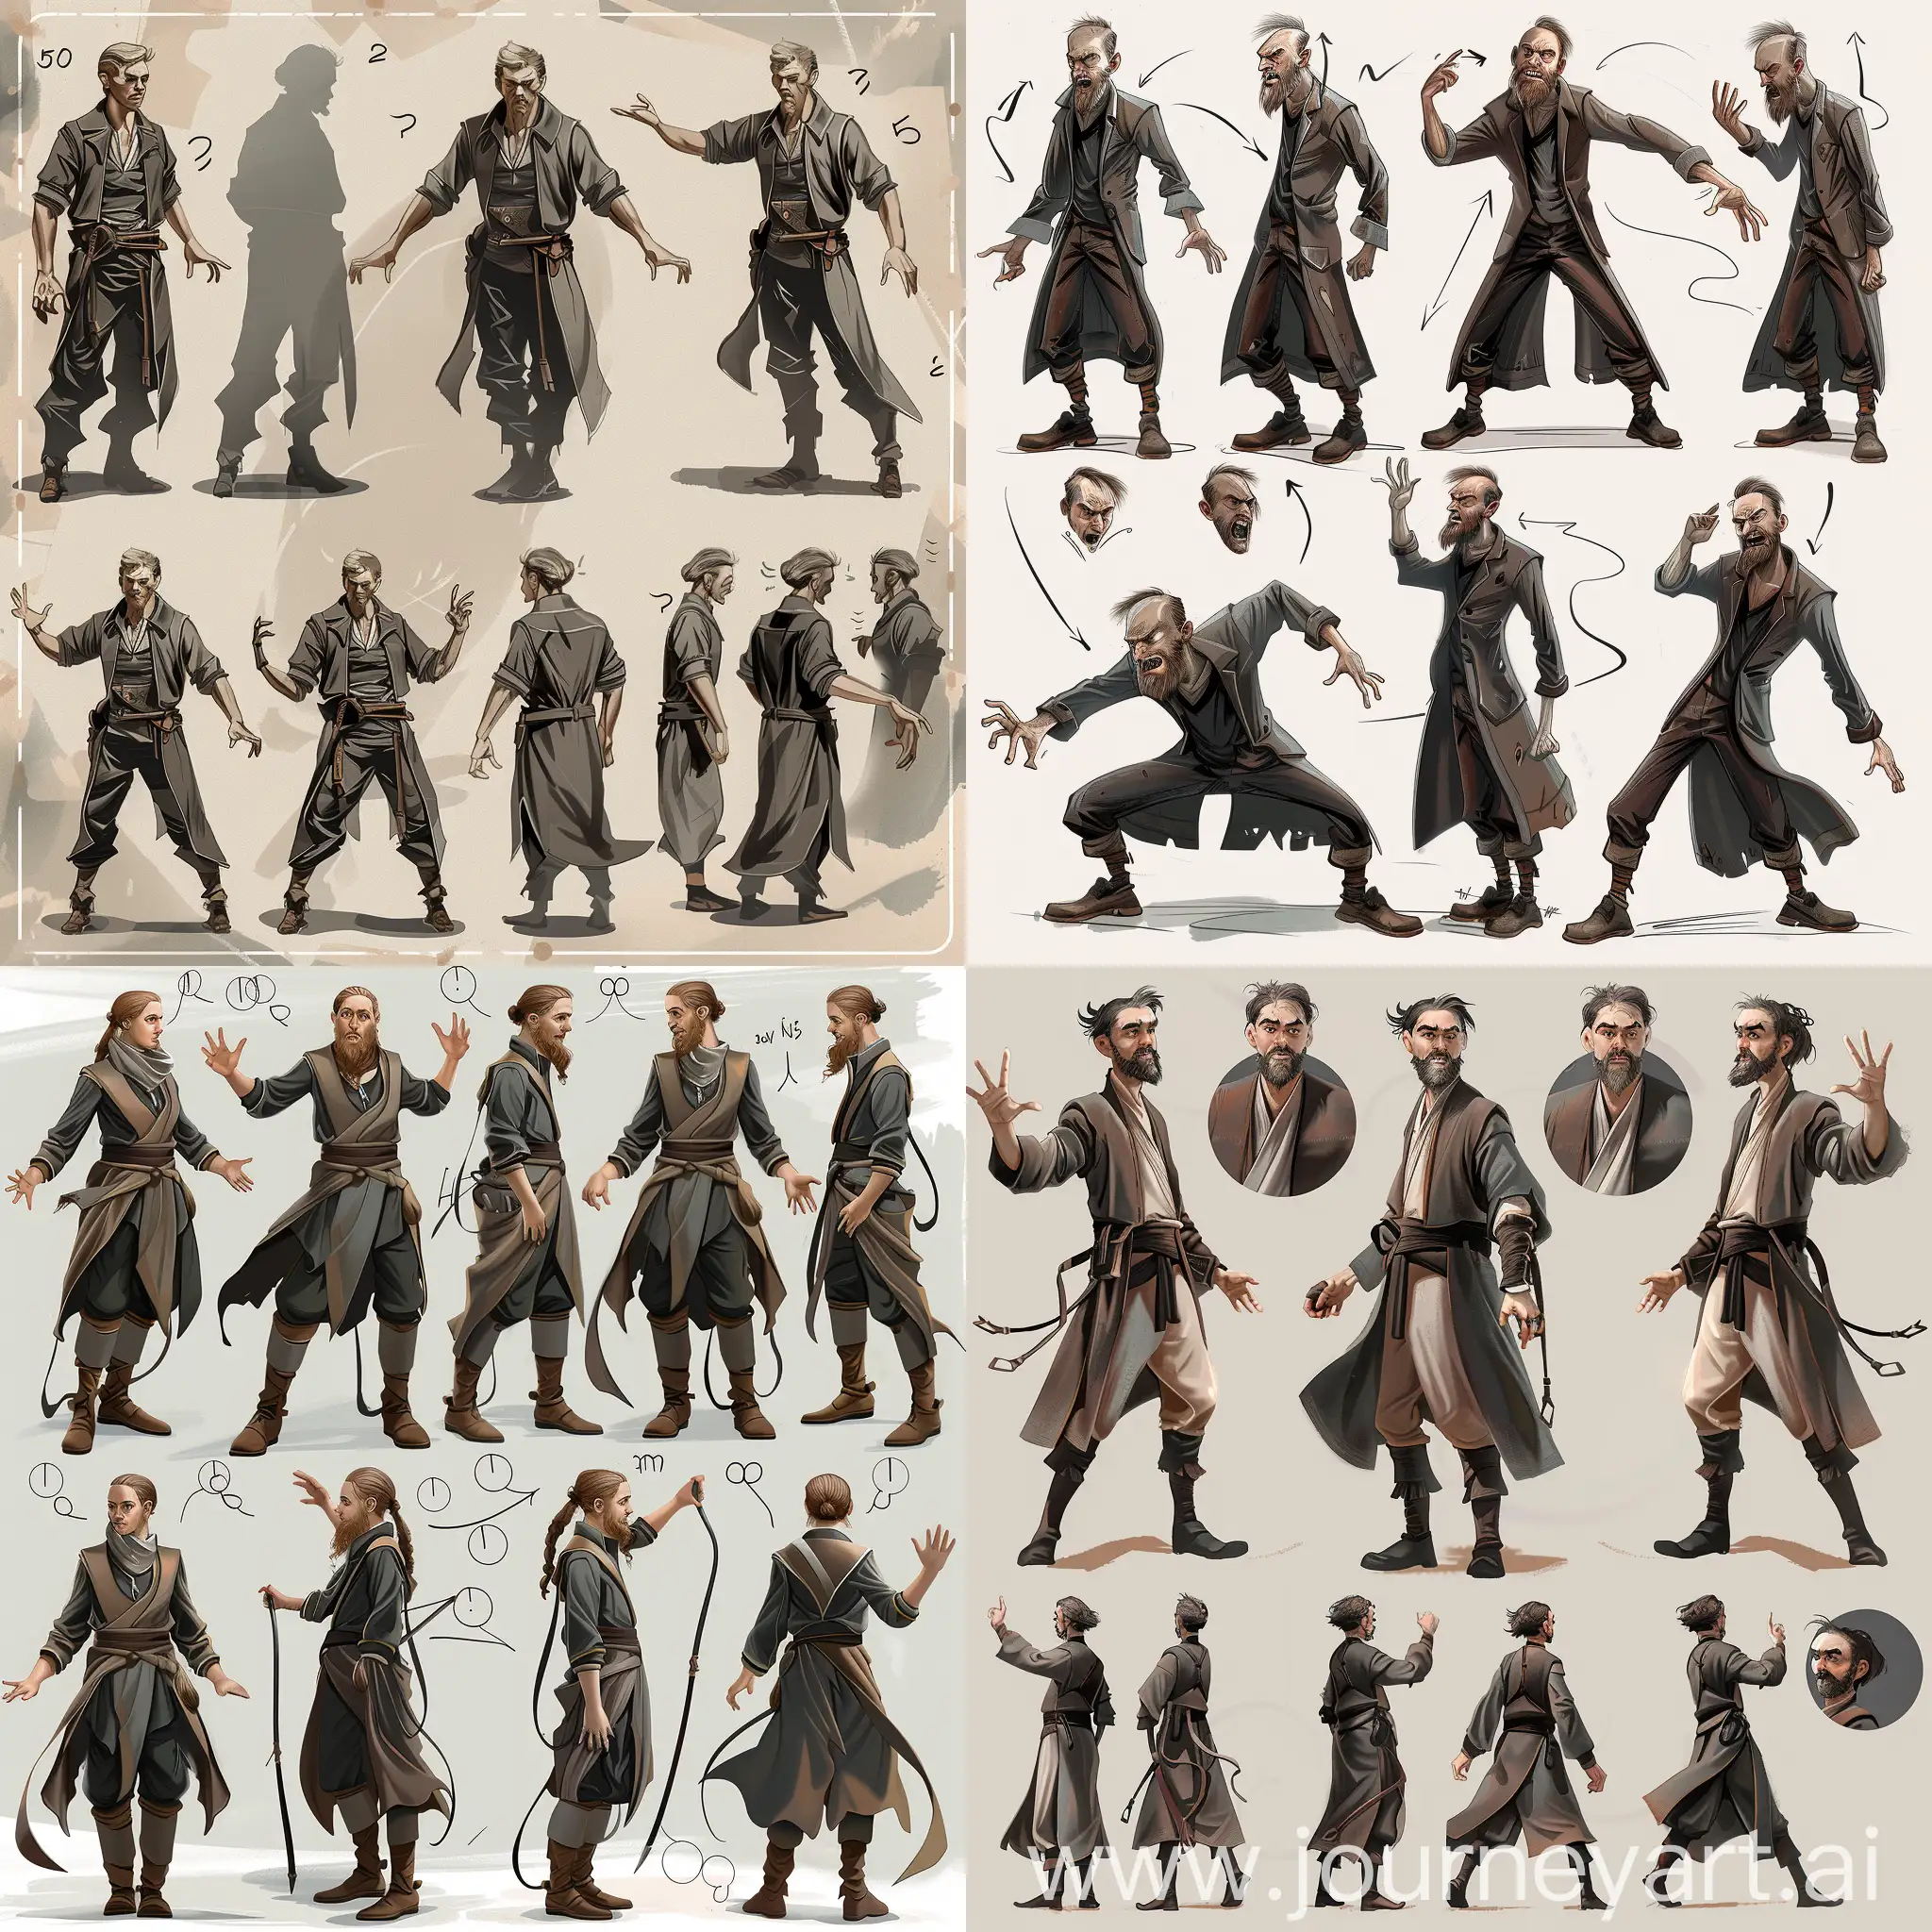 a detailed description of the character, various poses and emotions